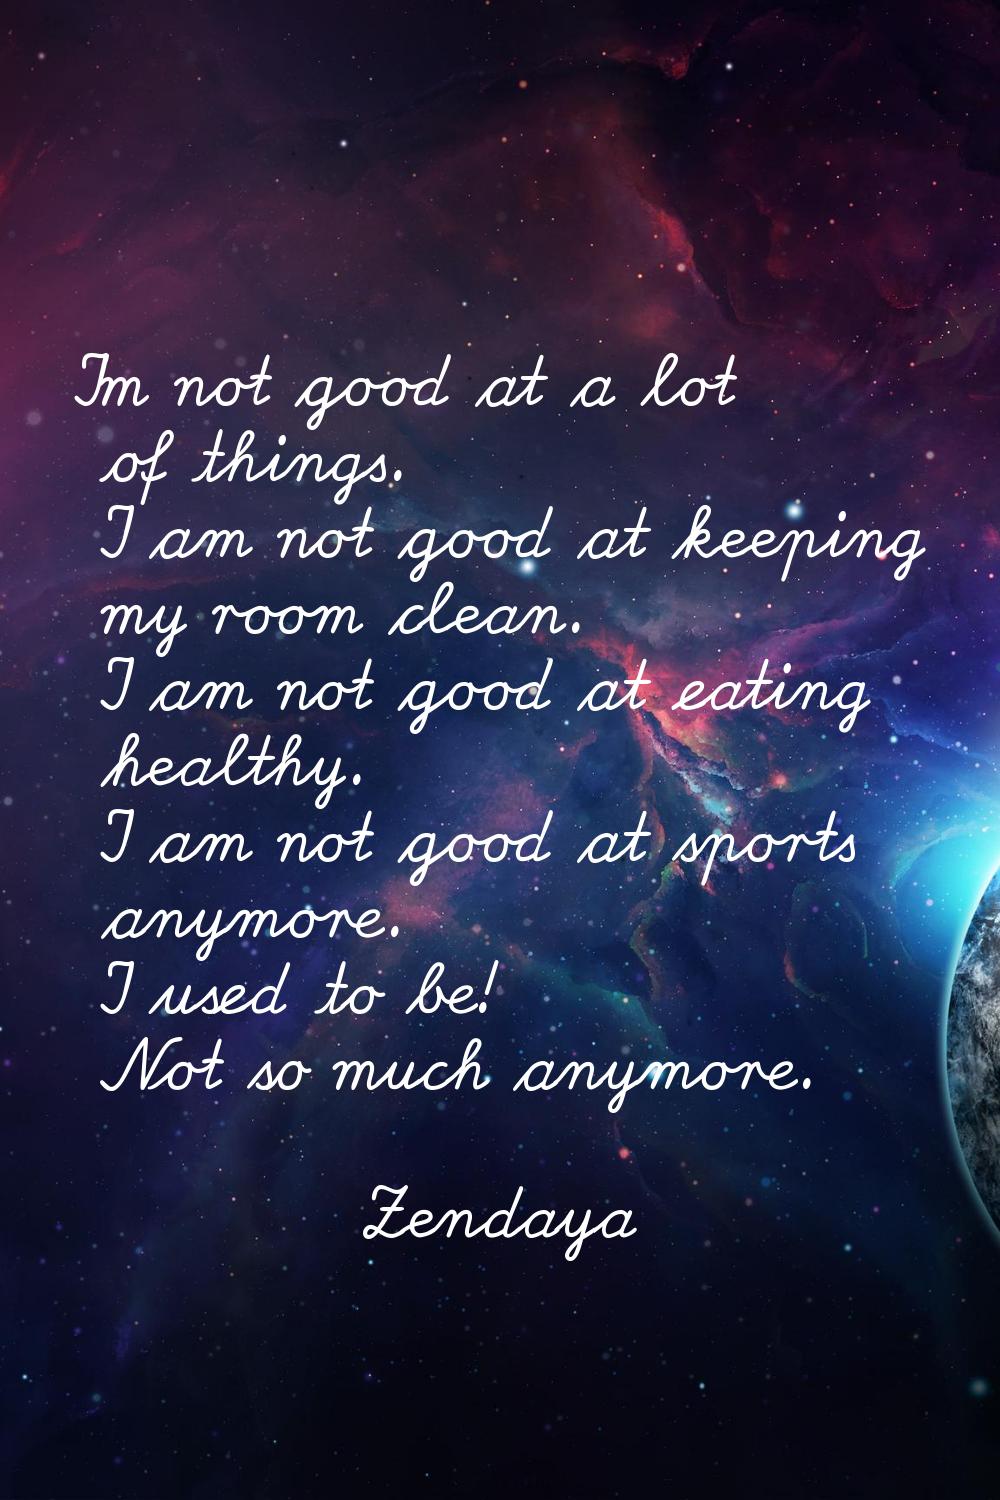 I'm not good at a lot of things. I am not good at keeping my room clean. I am not good at eating he